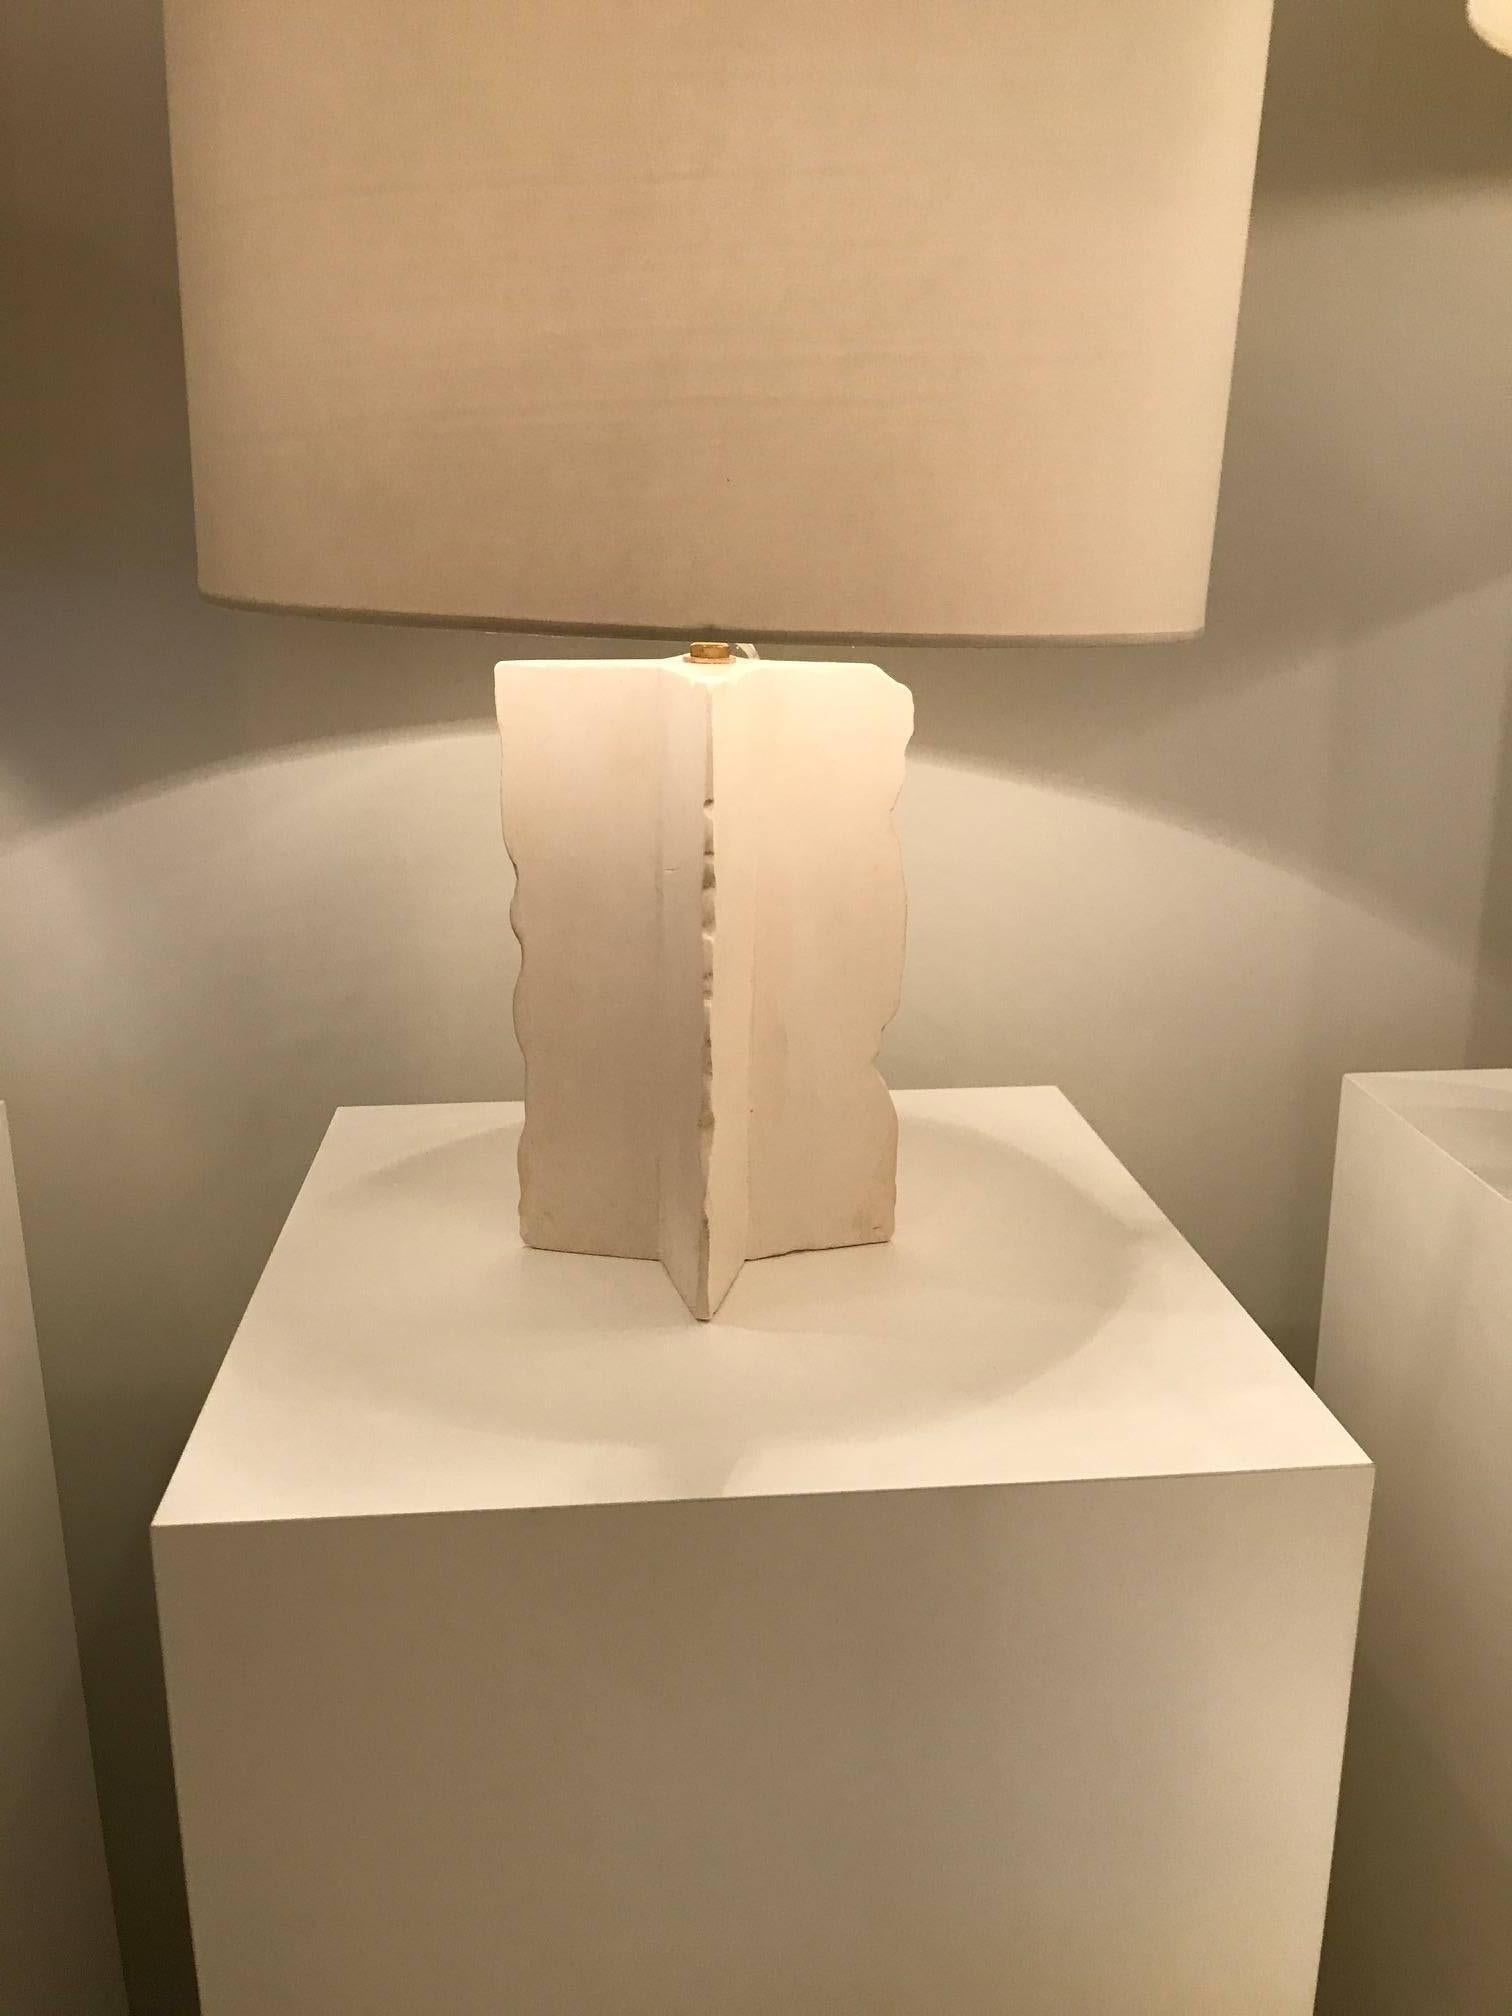 The Antic Comet table lamp is handcrafted in the Paris atelier of Julien Barrault. Base in sculpted white plaster with a handmade white shade. Made-to-order.